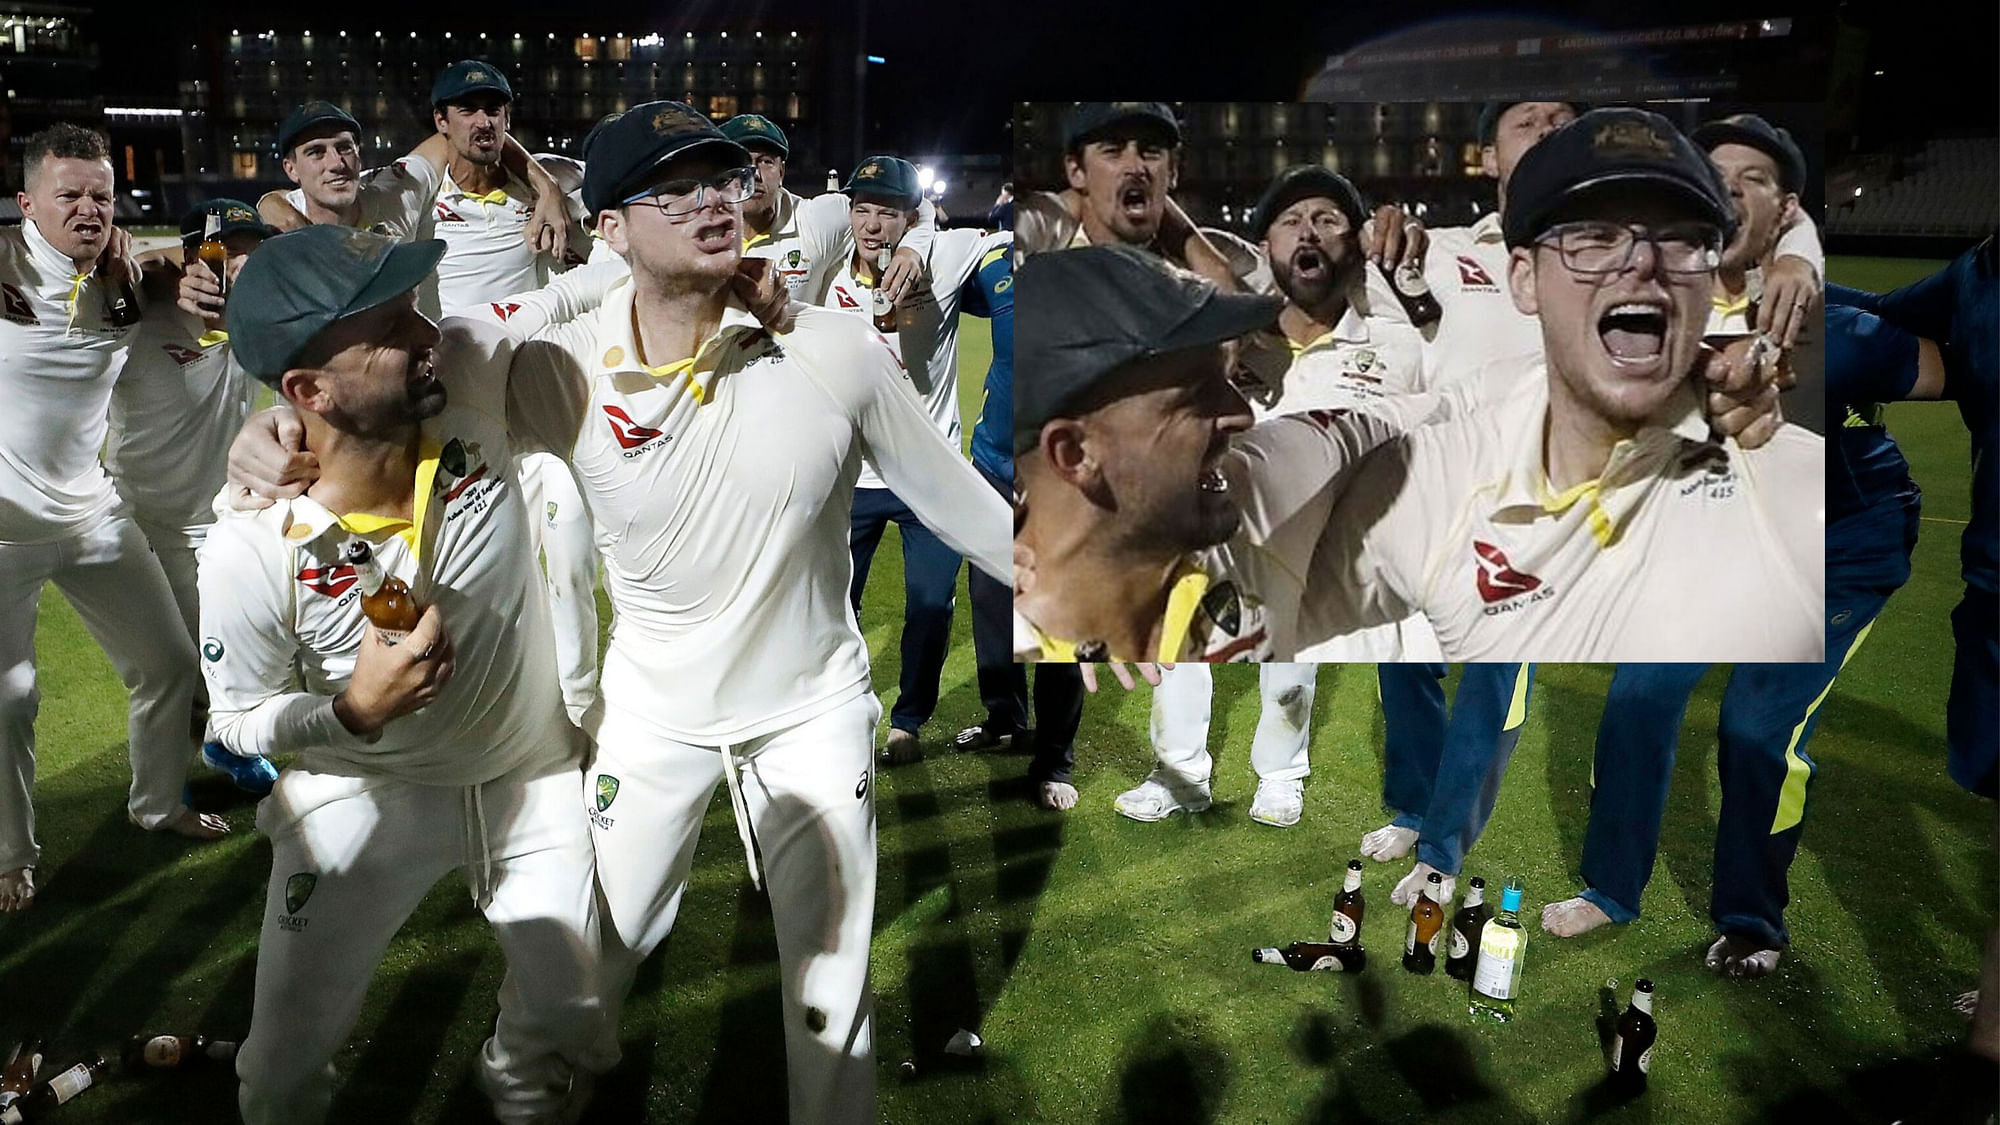 After Australia’s Ashes victory, Steve Smith celebrated in the team huddle by wearing glasses and shadow batting like Jack Leach